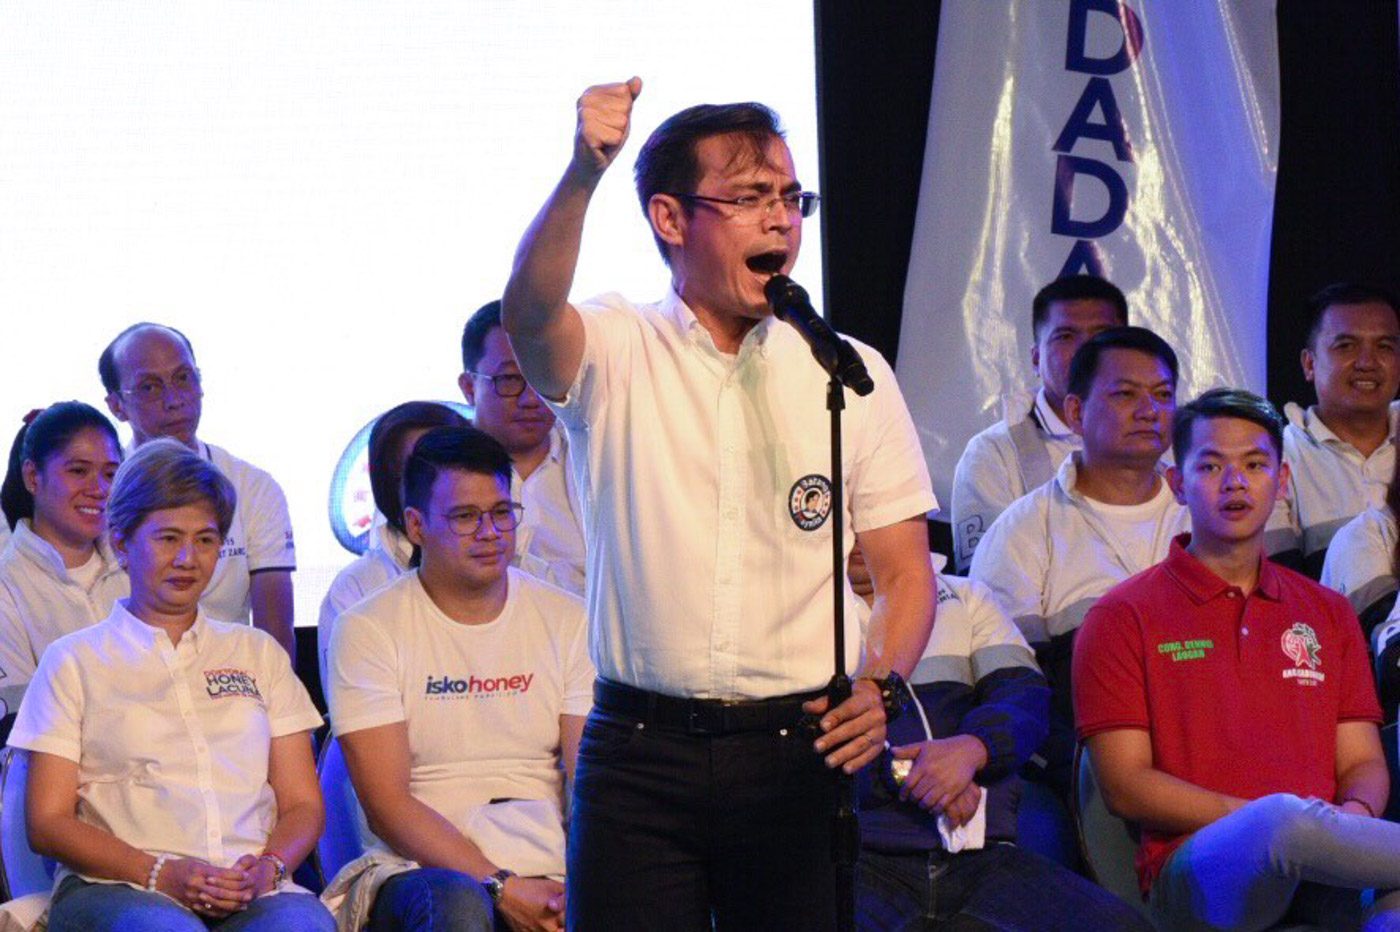 CAMPAIGN KICK-OFF. Manila mayoral bet Isko Moreno speaks at his campaign kick-off in Sampaloc, Manila, on March 29, 2019. Photo by Alecs Ongcal/Rappler 